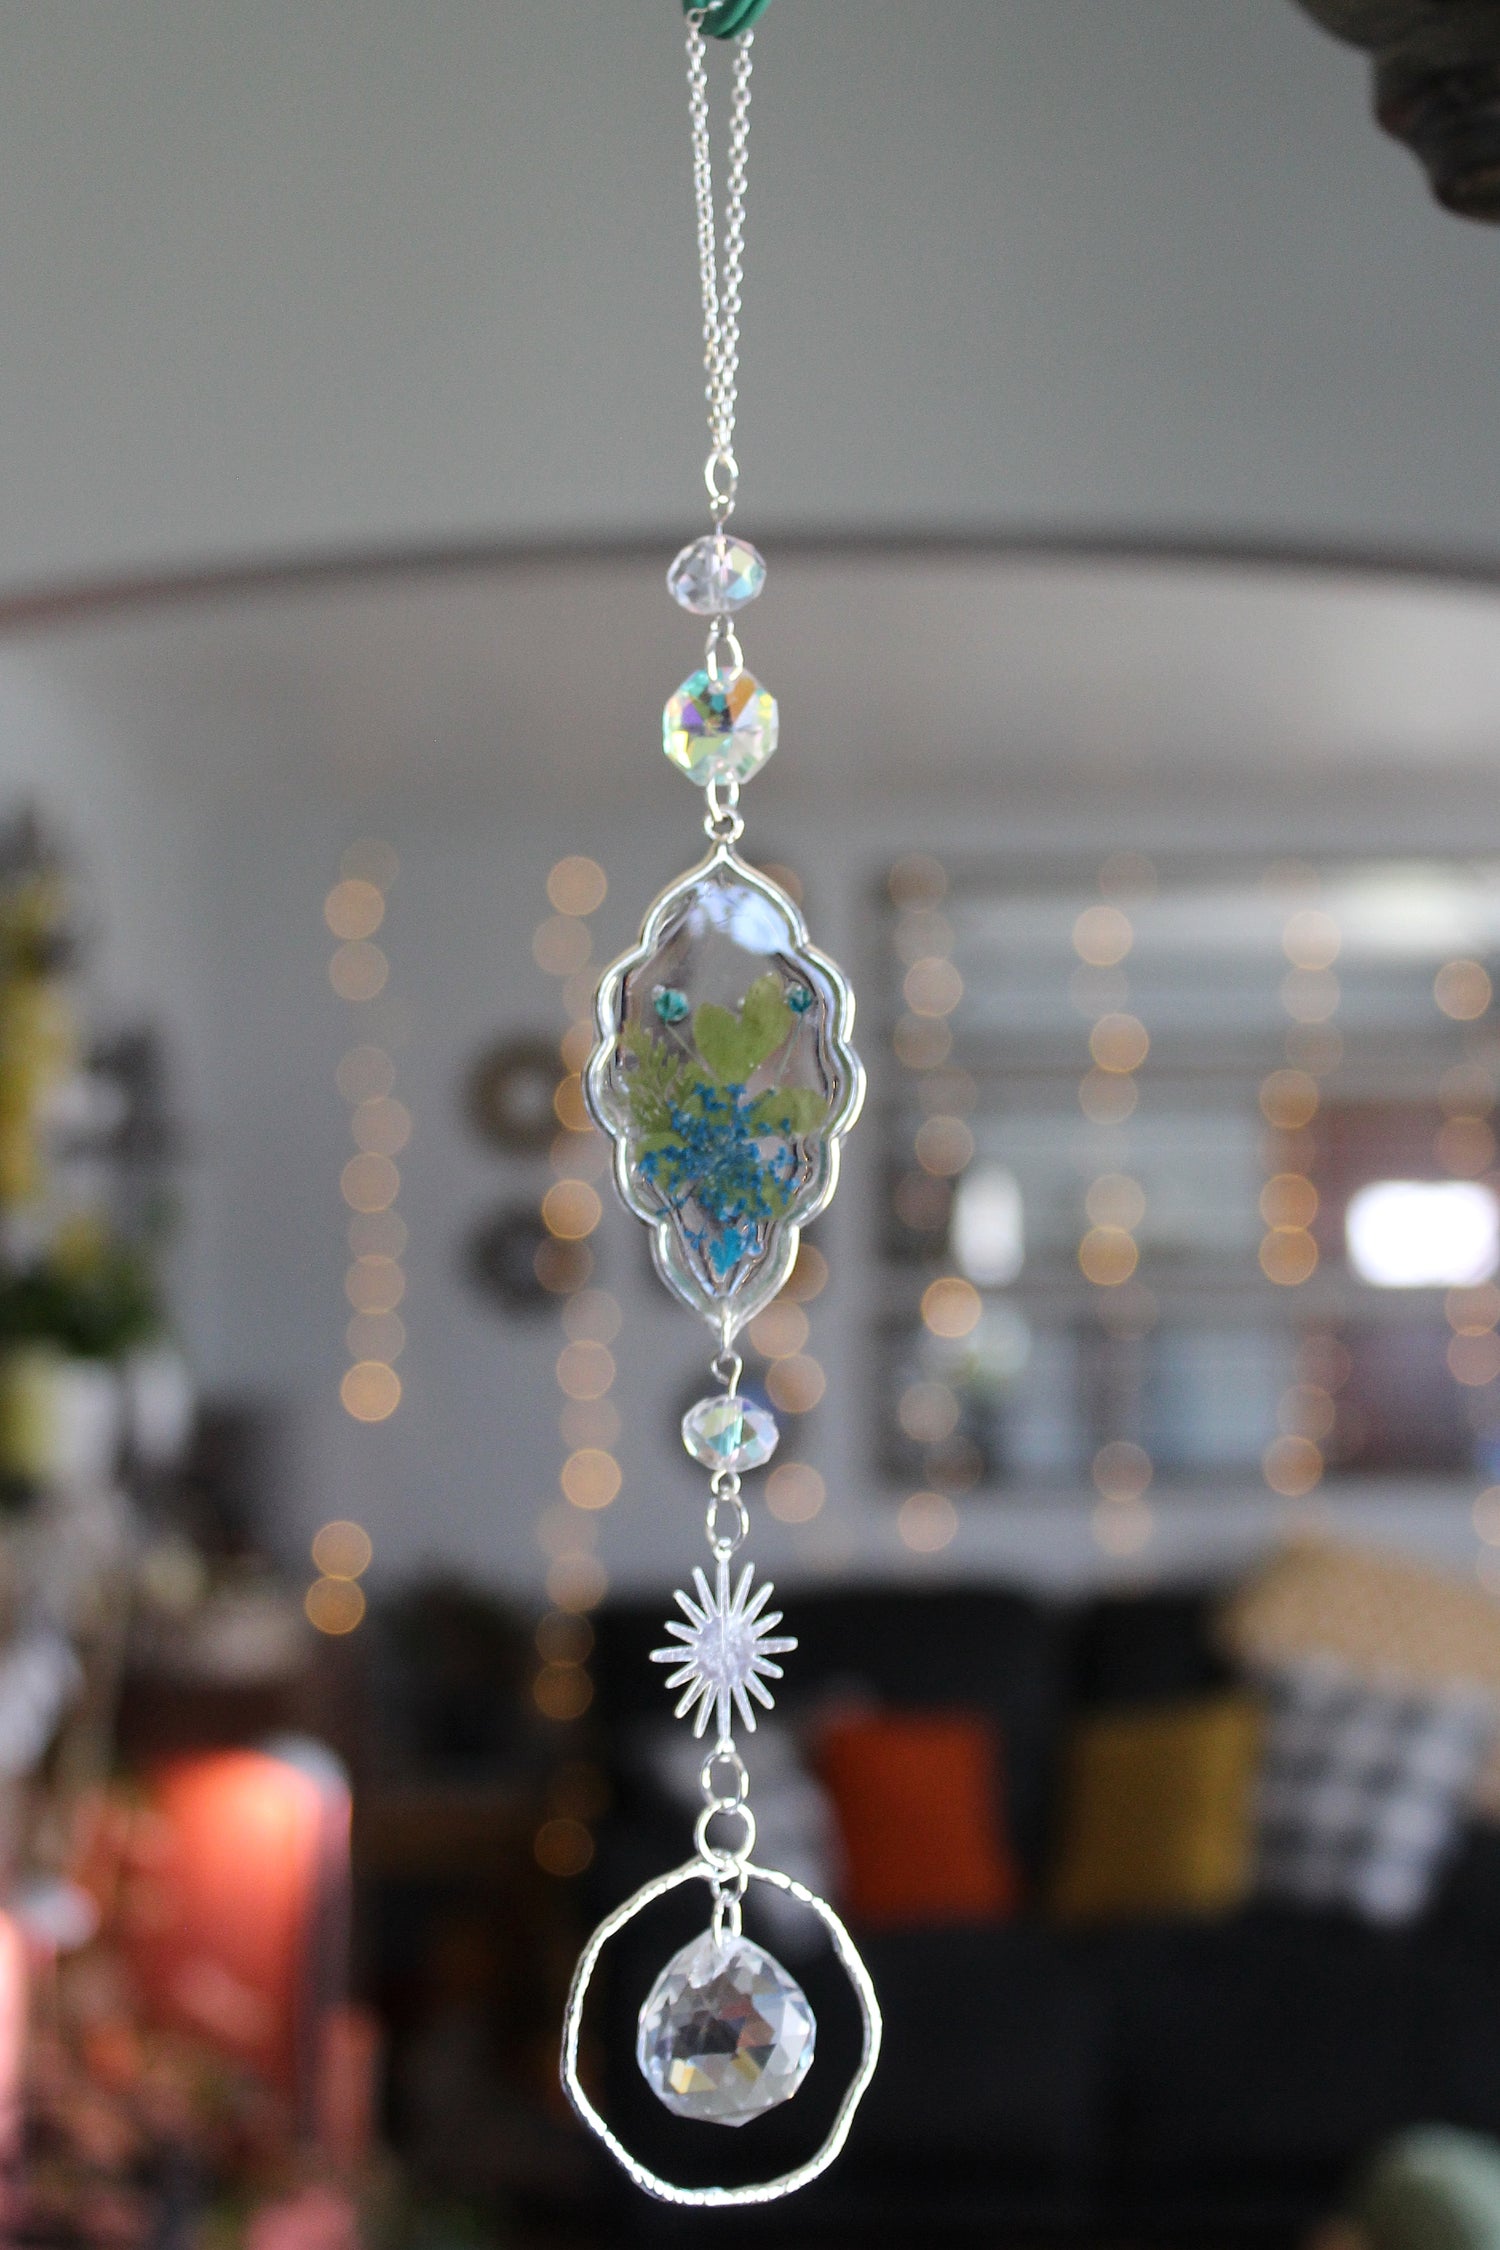 Sun Catchers & Rearview Mirror Charms